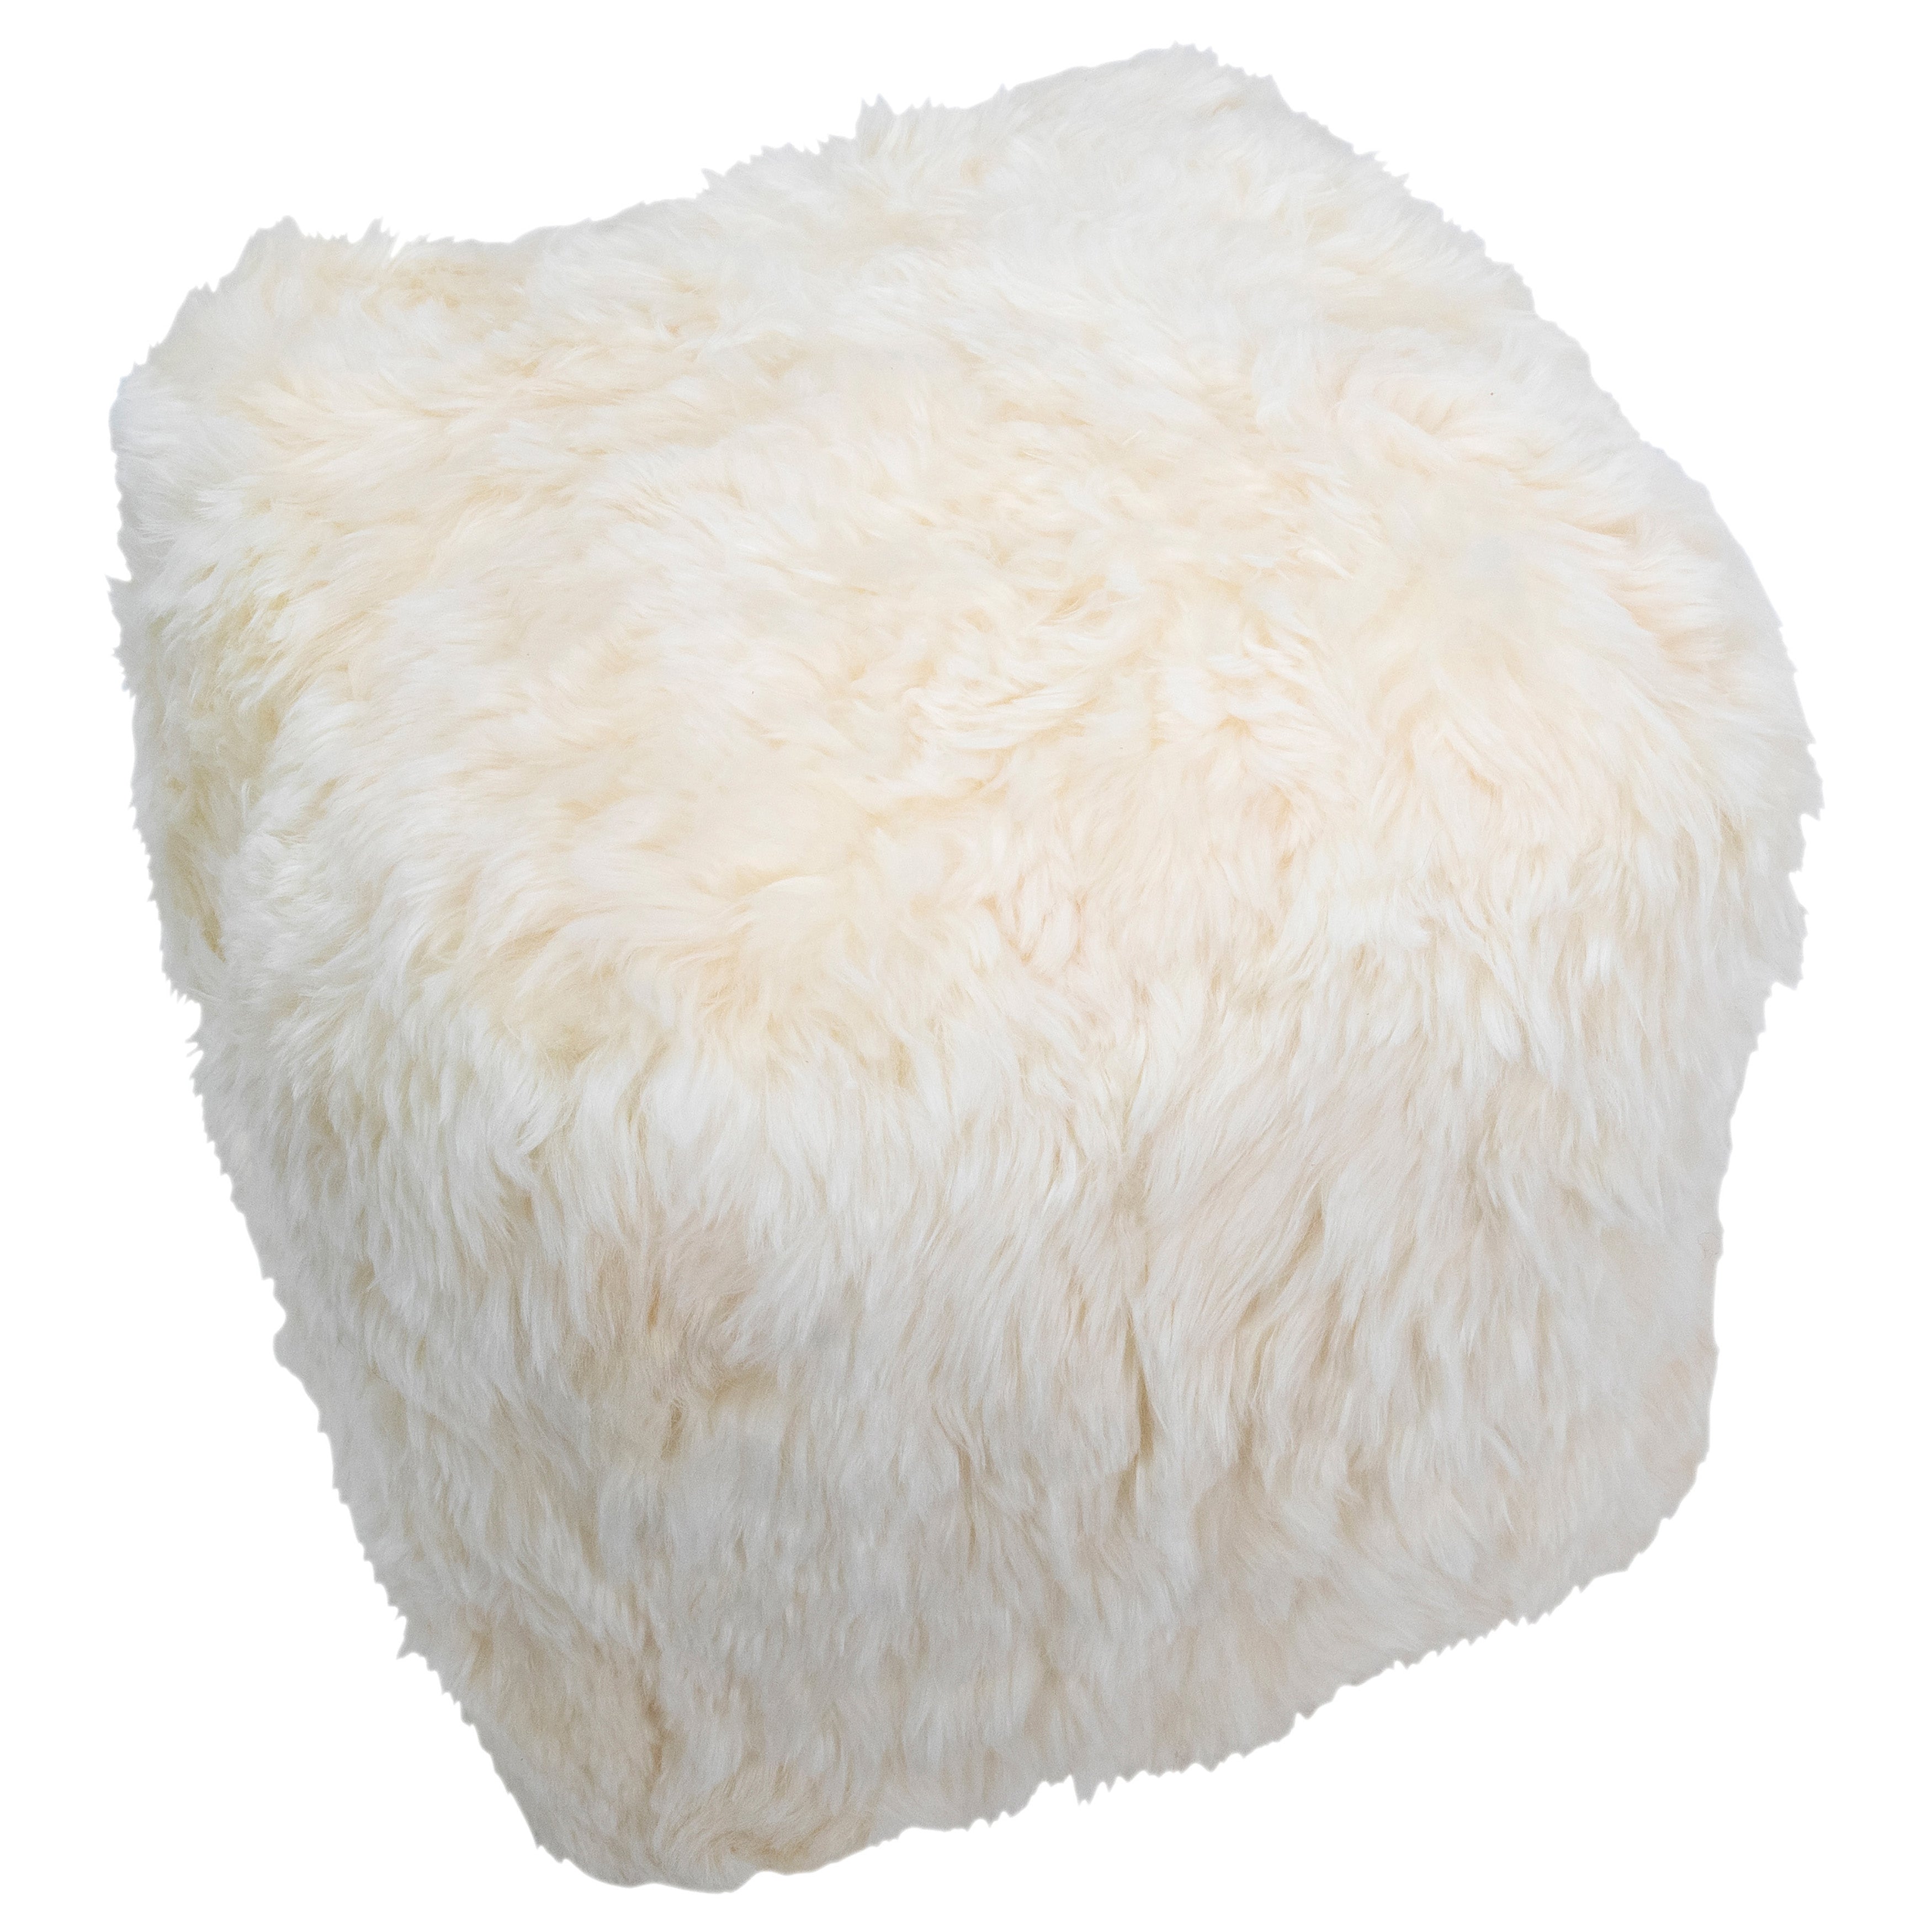 A classic accent piece designed with style and function in mind. This 16x16” Pouf can be used as an extra seat or ottoman to rest up your feet. Crafted from genuine sheep fur for an over-the-top luxurious touch. Featuring a natural white color that blends well with a variety of decor schemes in your home.Depth : 16 in Amethyst Home provides interior design, new home construction design consulting, vintage area rugs, and lighting in the Tampa metro area.